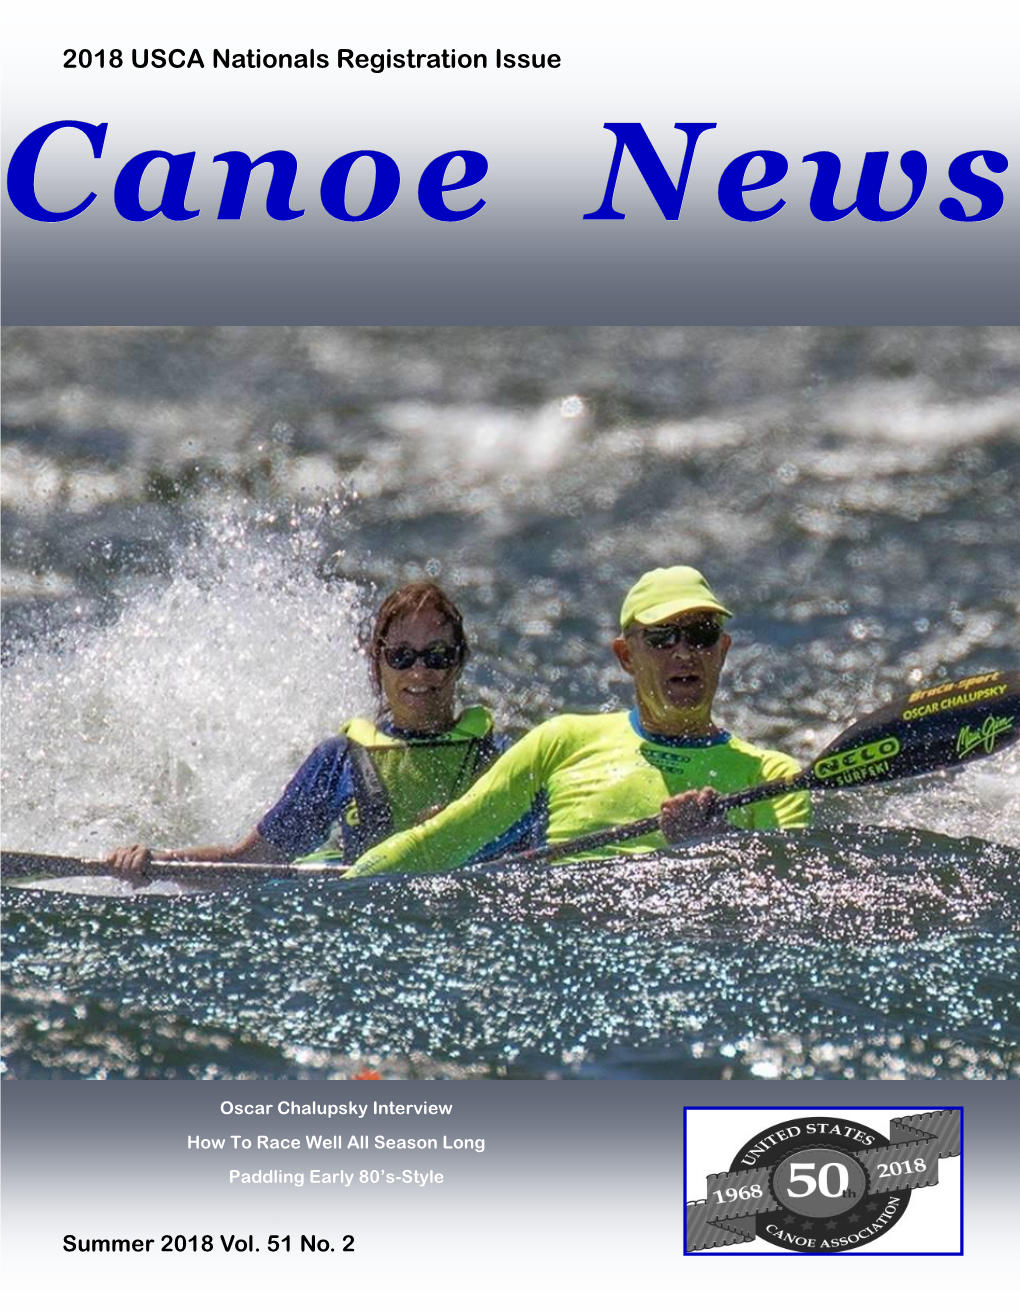 2018 USCA Nationals Registration Issue Canoe News